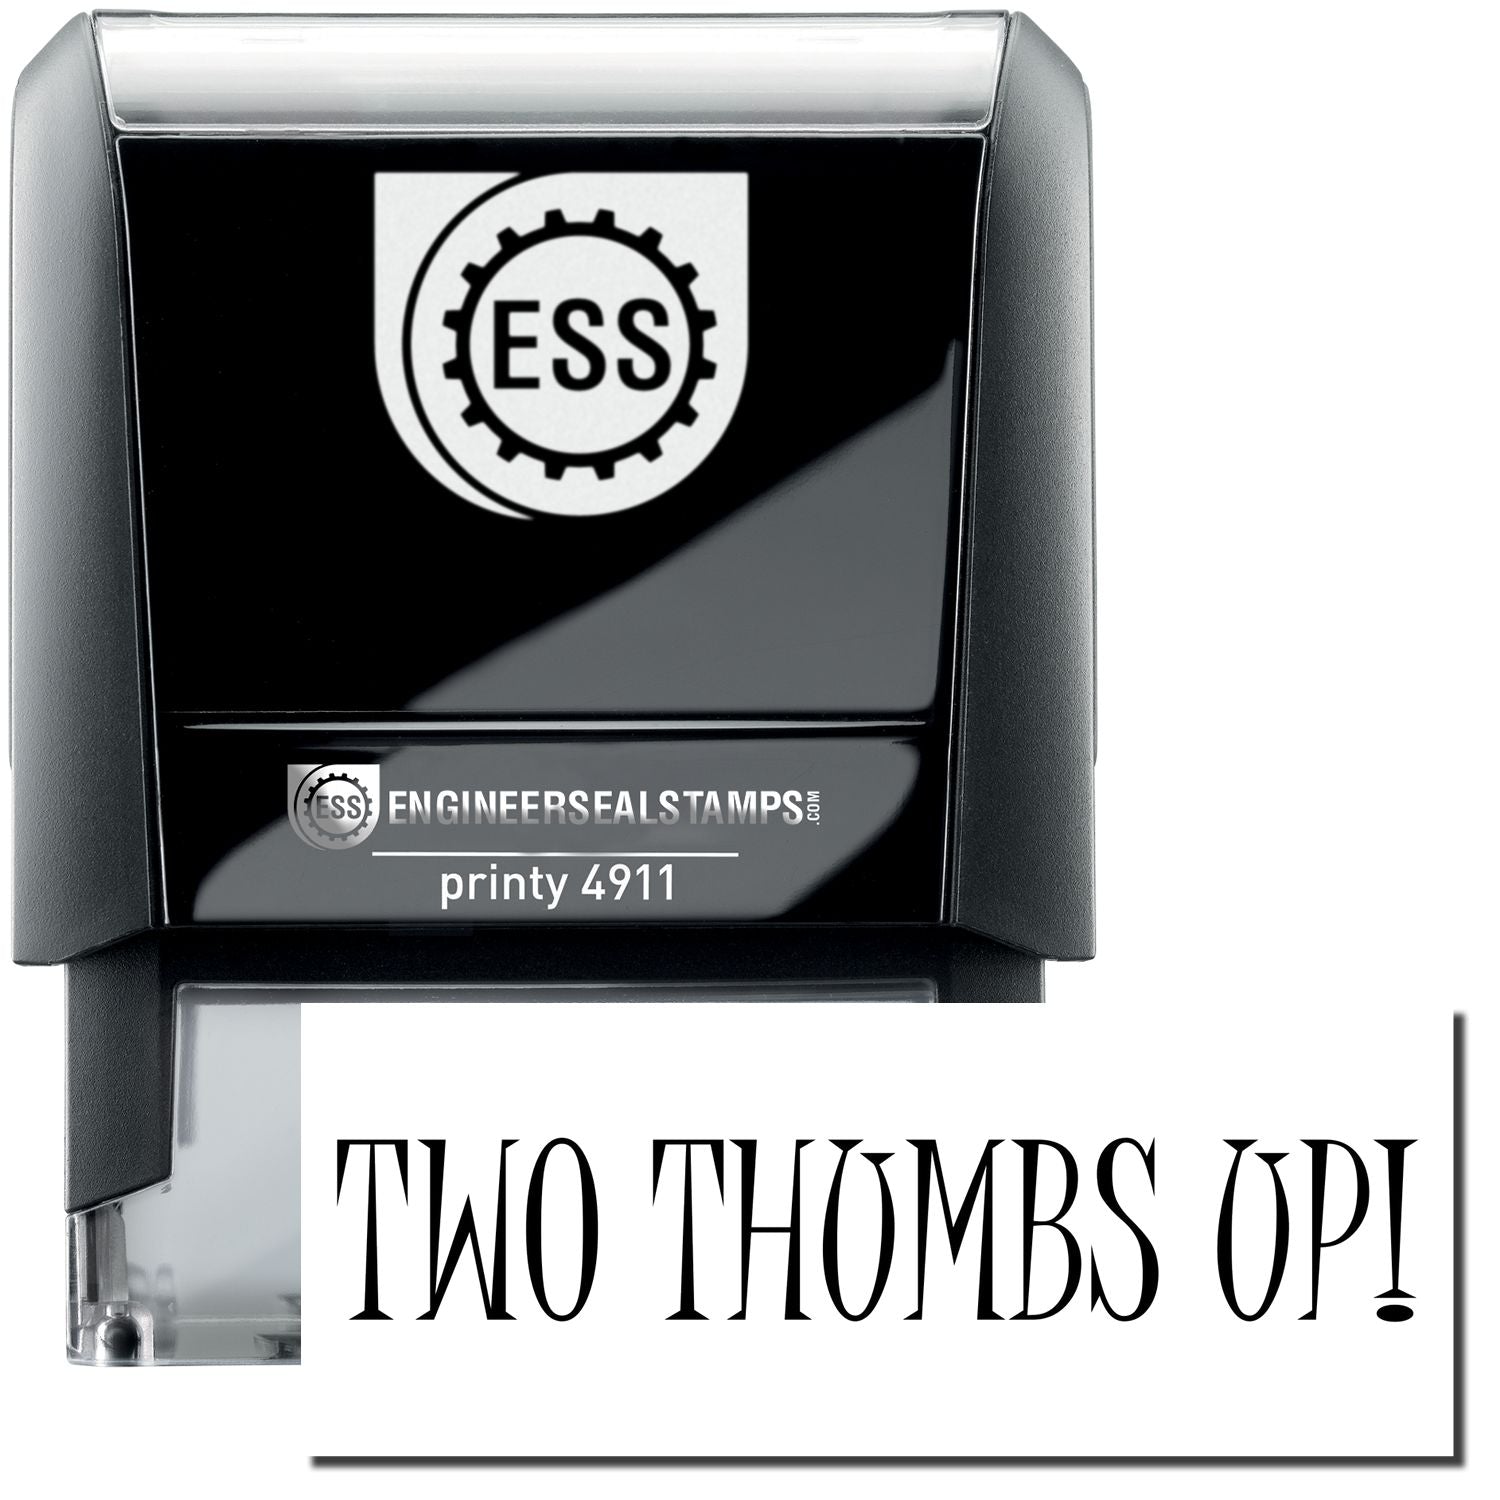 A self-inking stamp with a stamped image showing how the text "TWO THUMBS UP!" is displayed after stamping.